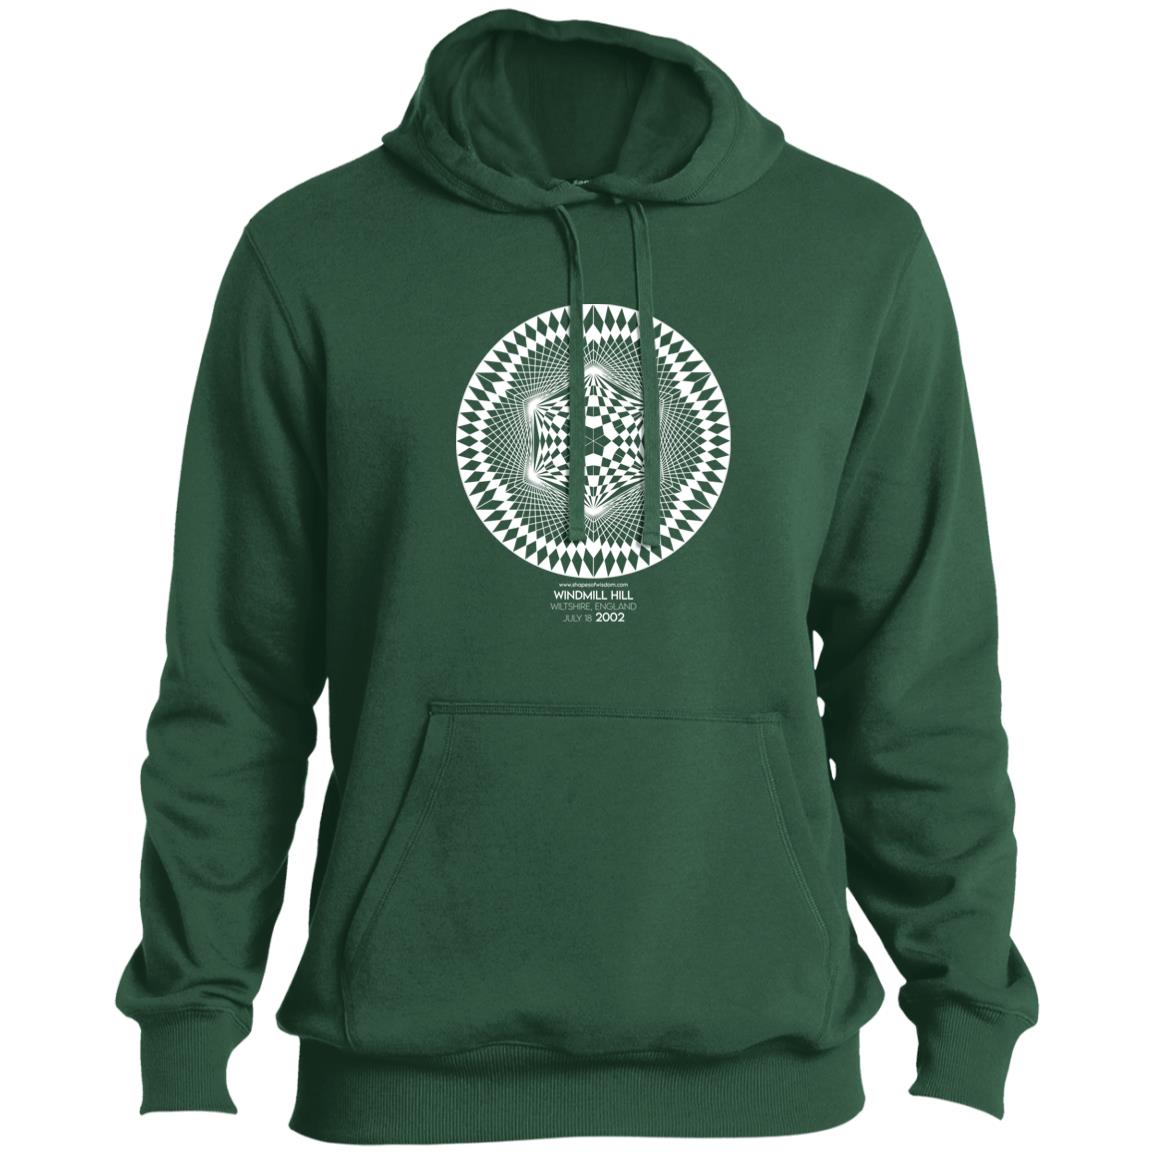 Crop Circle Pullover Hoodie - Windmill Hill 4